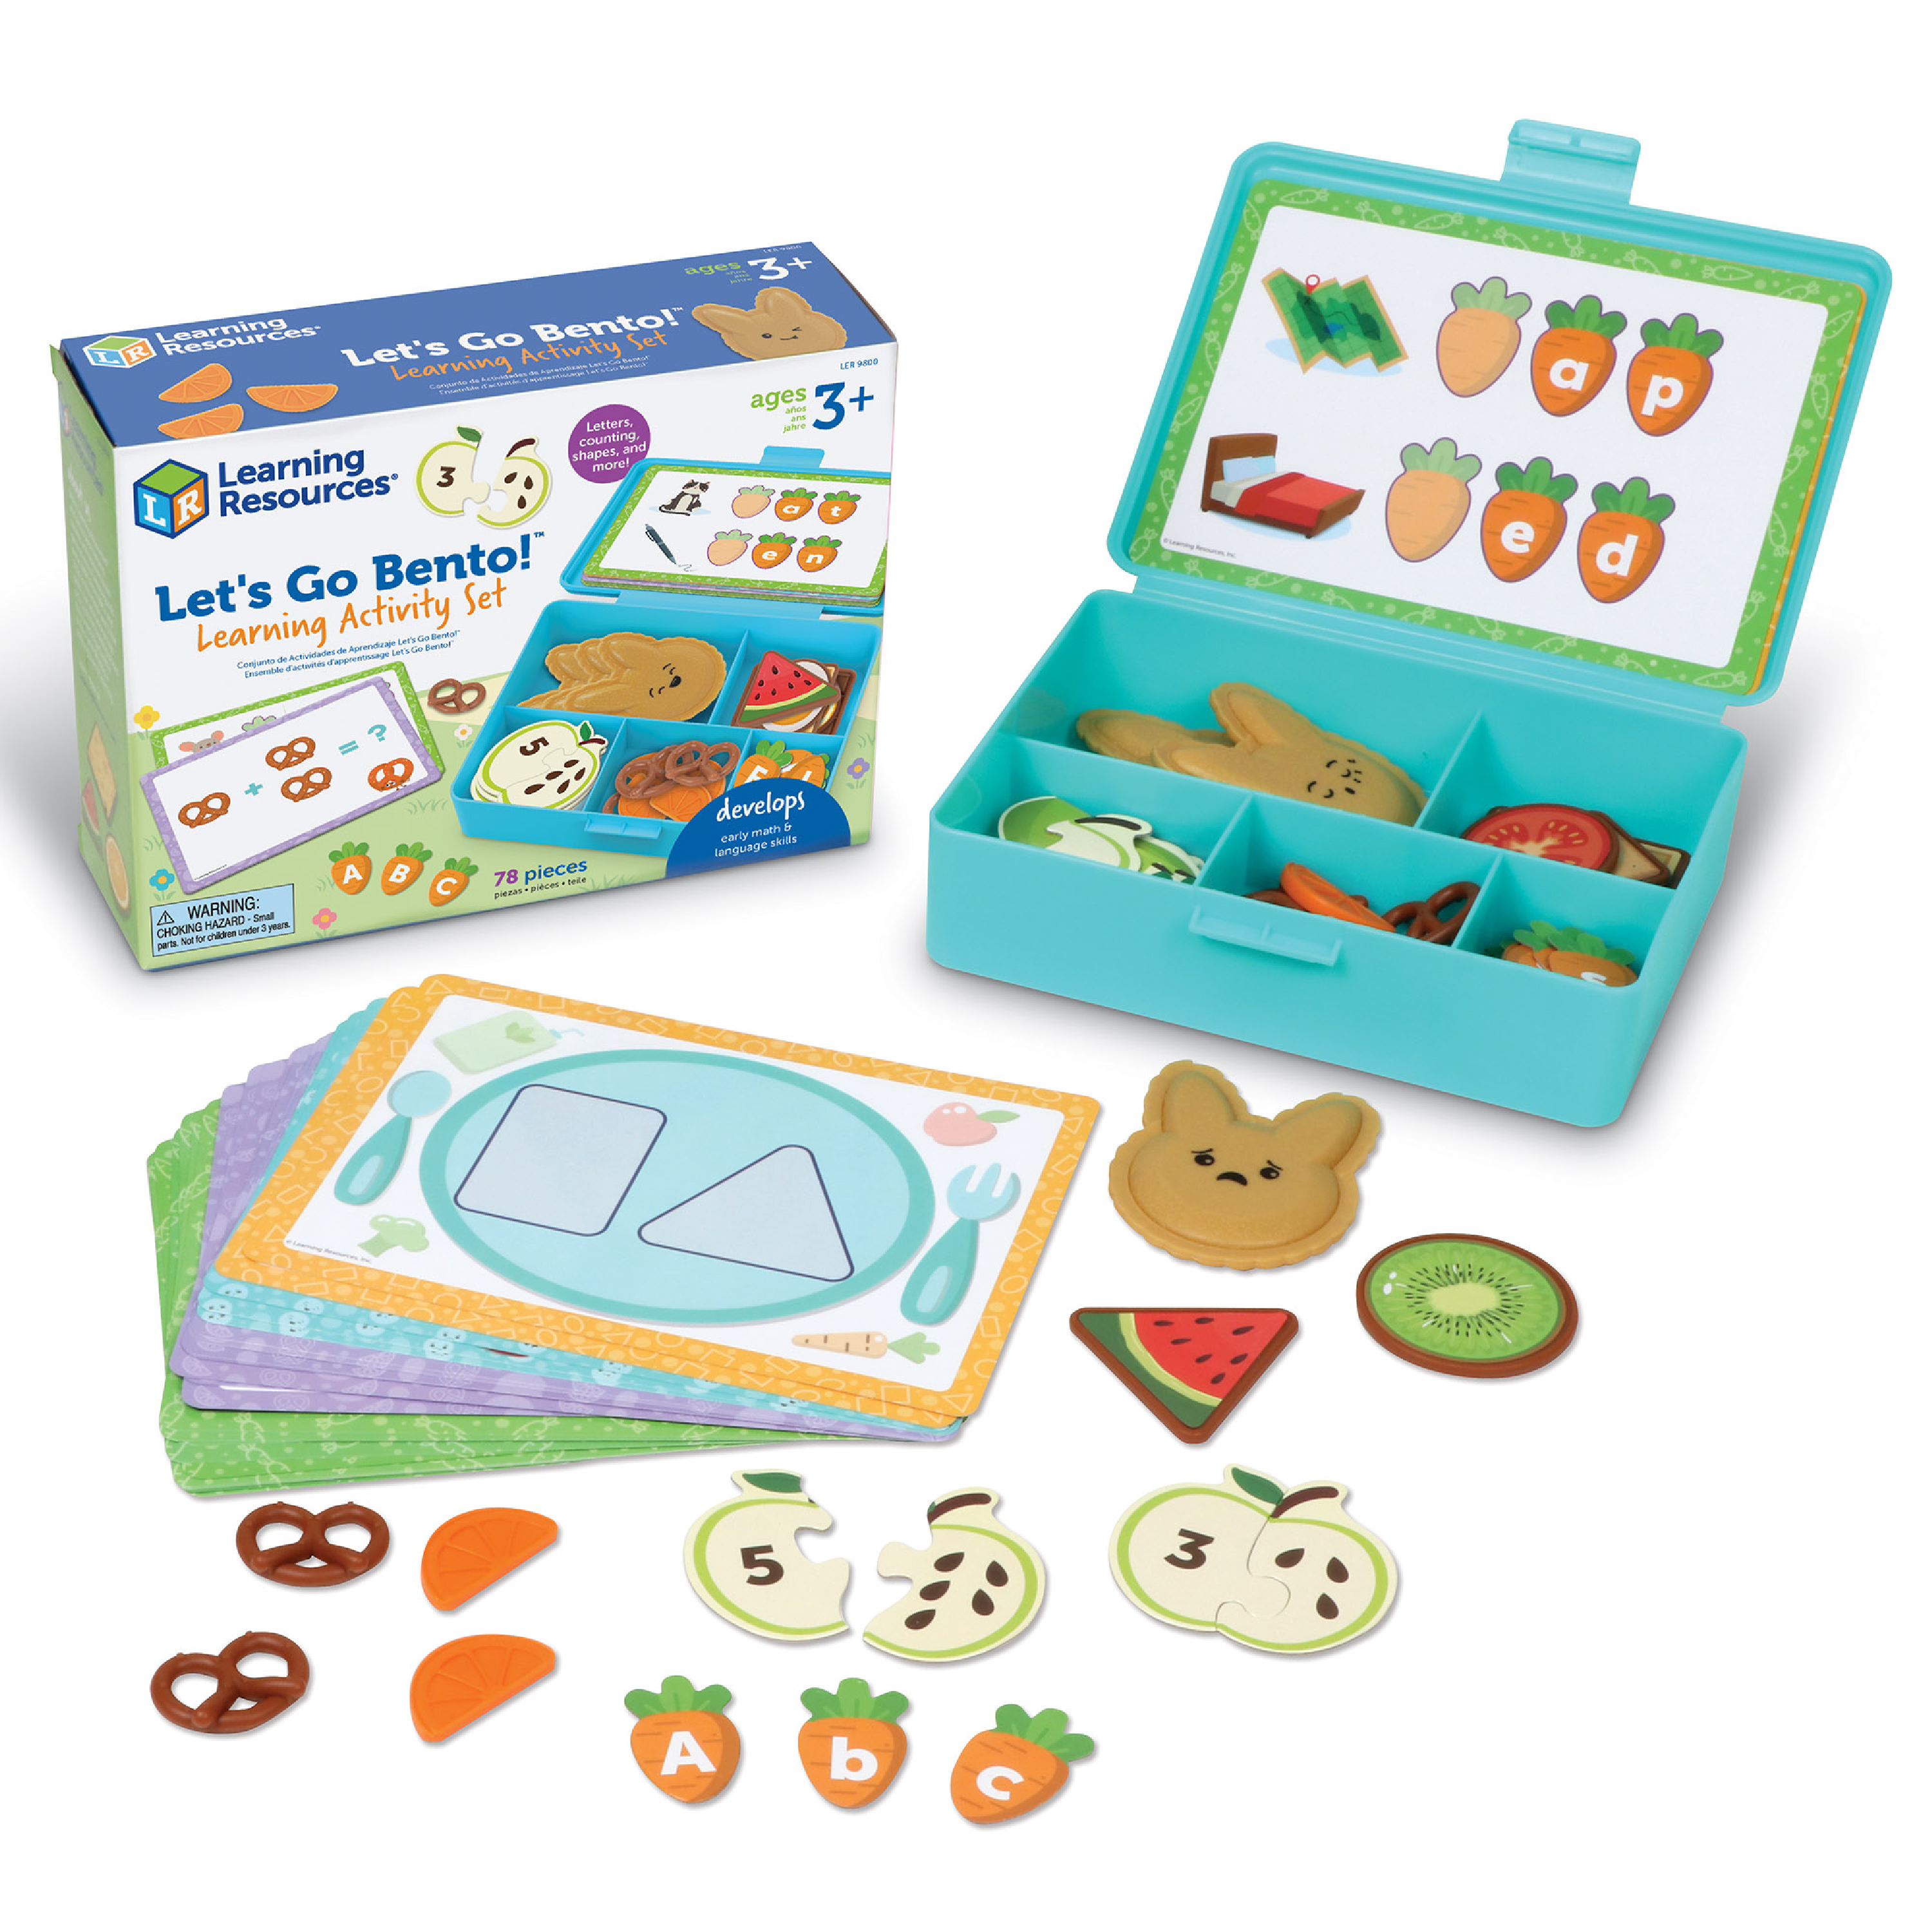 Learning Resources Let's Go Bento! Learning Activity Set - 78 pieces, Bento Box Toy for Boys and Girls Ages 18+ months - image 1 of 8